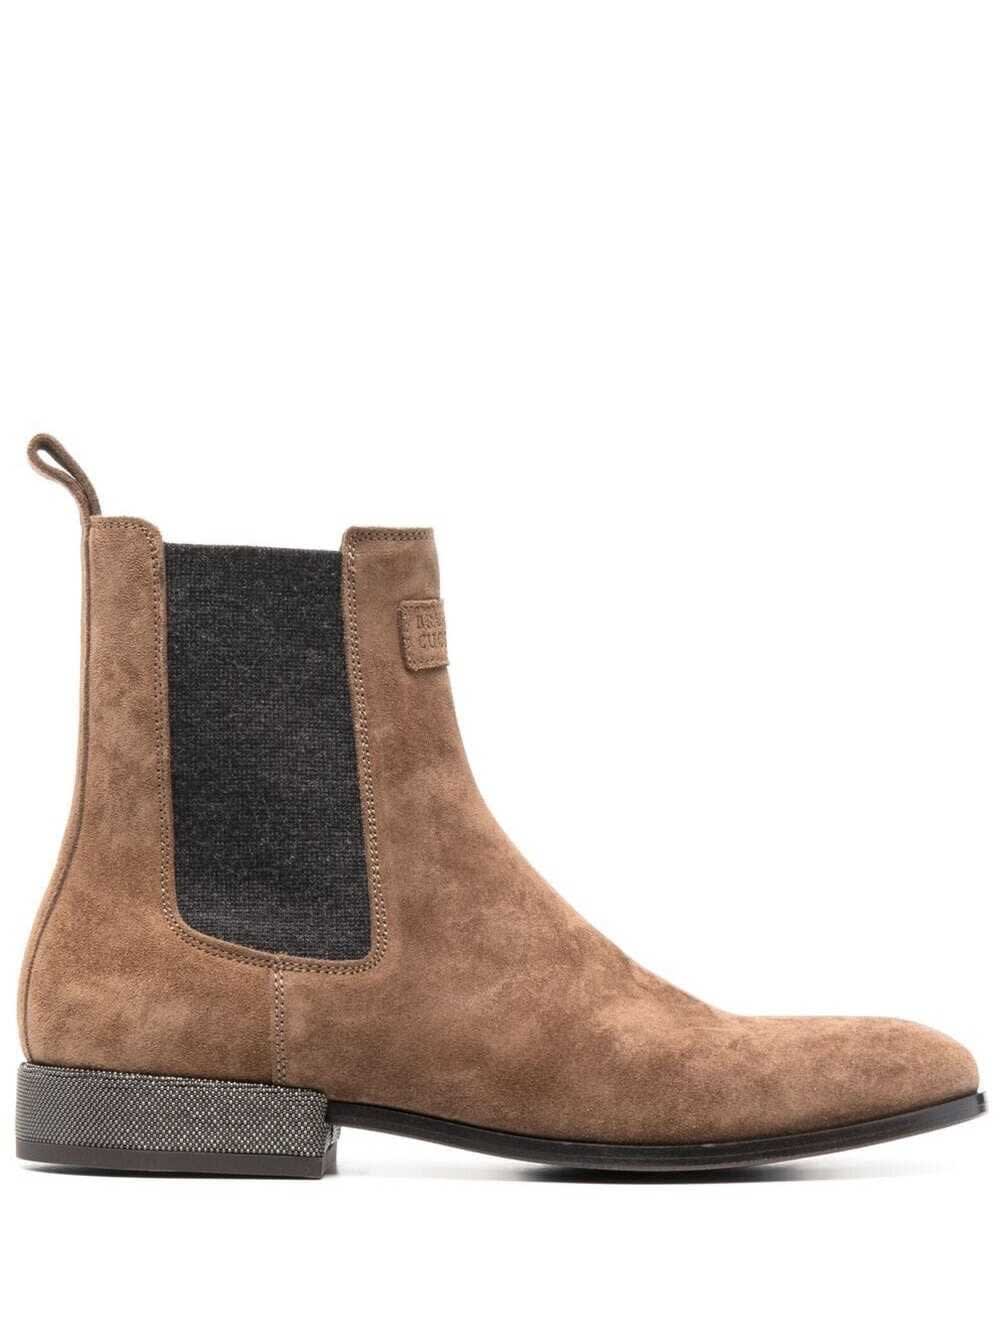 Brunello Cucinelli Brown Suede Leather Ankle Boots